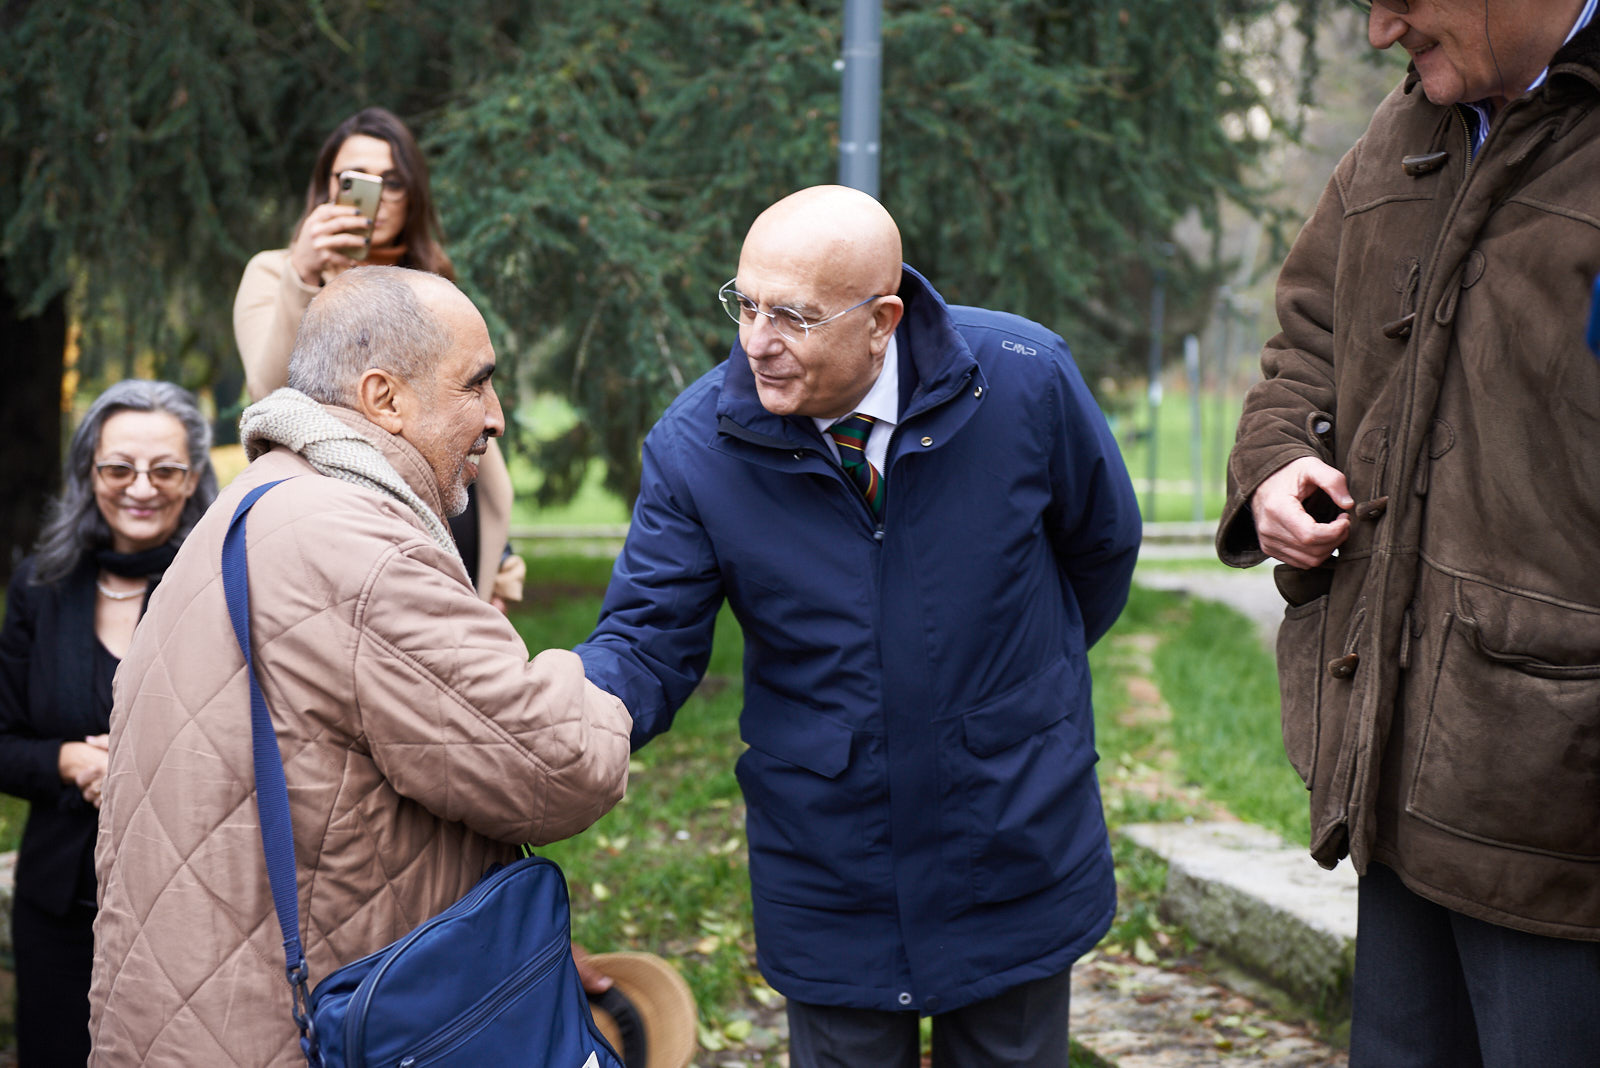 Gabriele Albertini, former mayor of Milan, supporter, in 2003, of the creation of the Milan Garden, with Mohamed Naceur ben Abdesslem, Righteous honoured at the Garden of Milan 